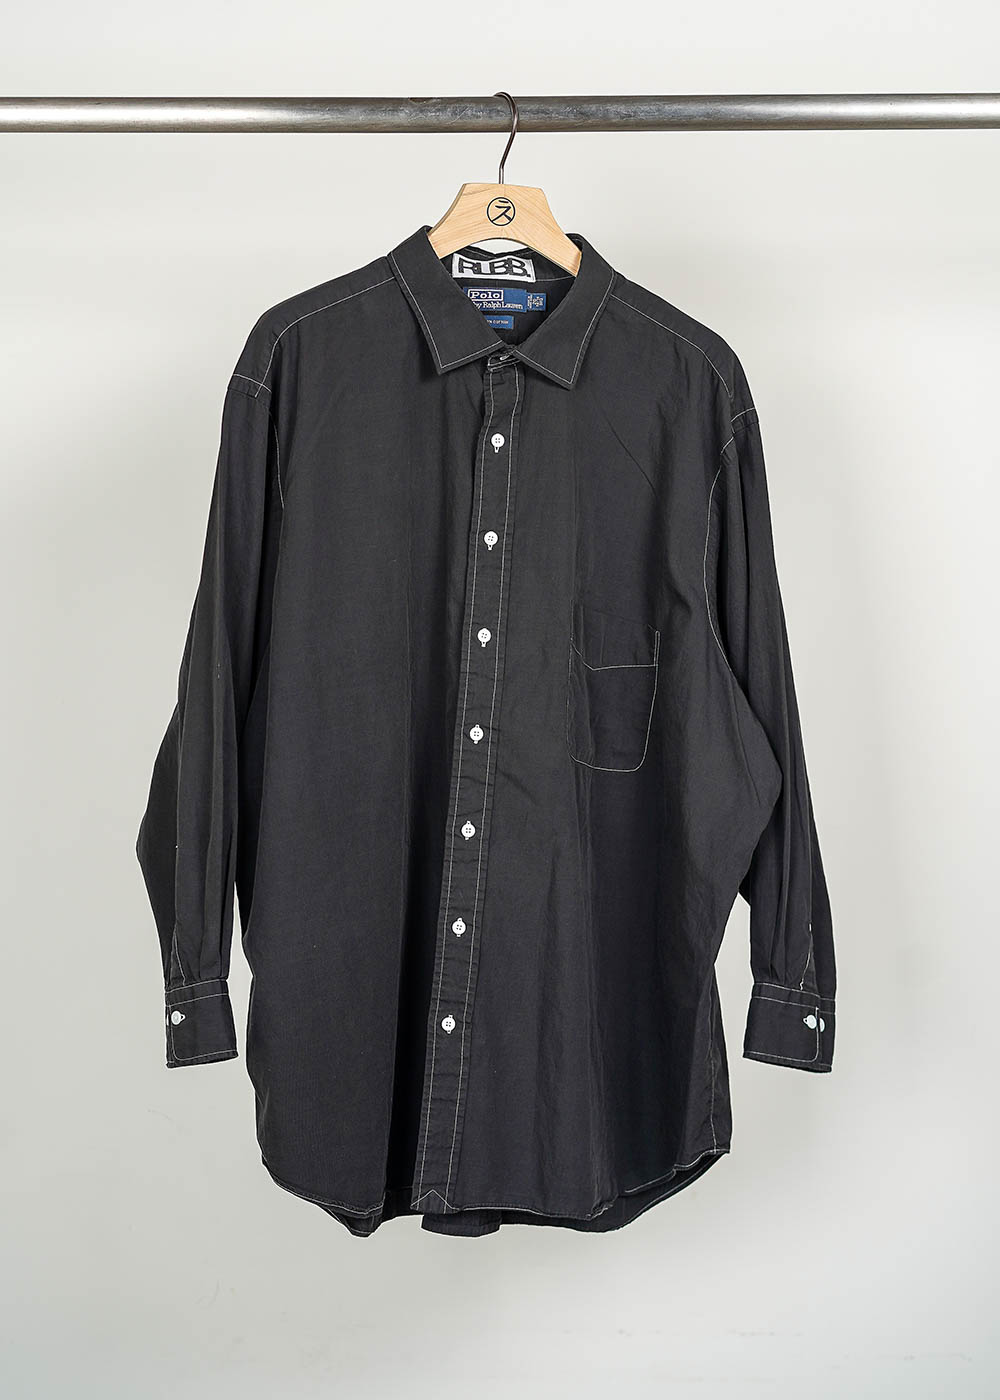 reproduction 166 / PRL Big Shirts (Overdyed)